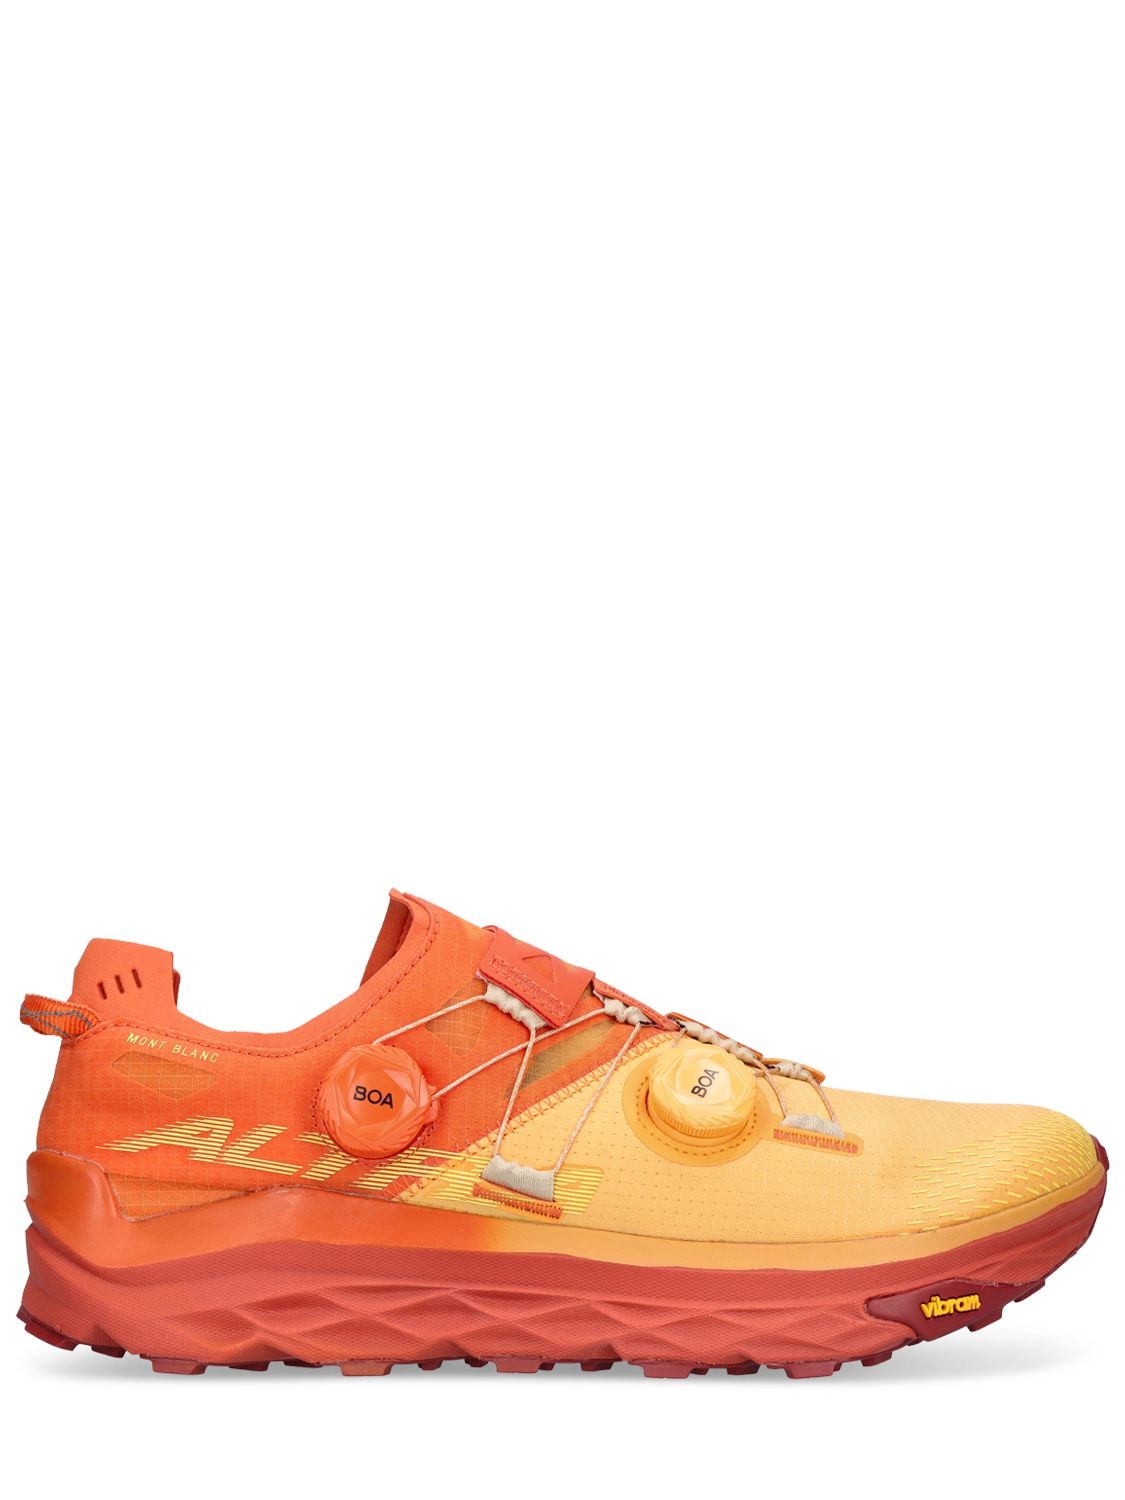 Altra Running Mont Blanc Boa Trail Running Sneakers In Orange